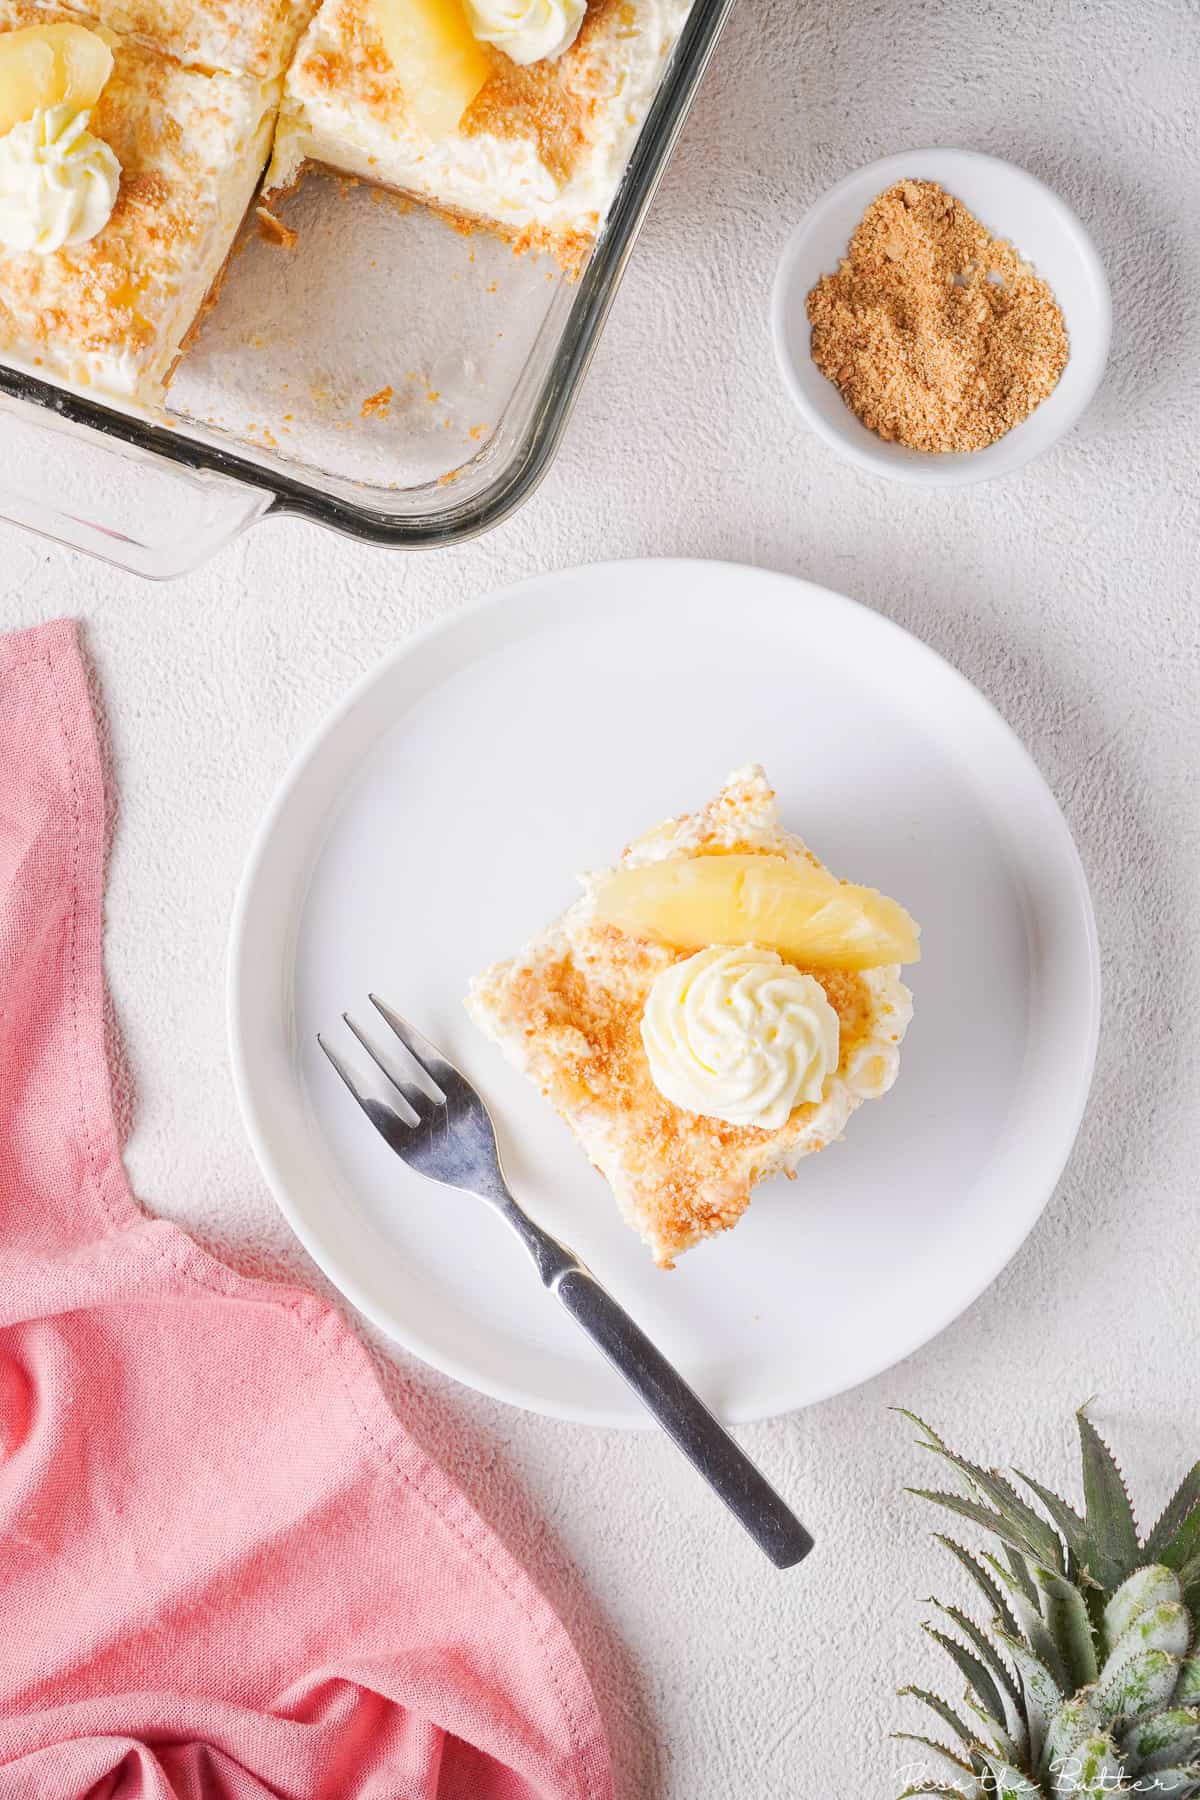 Slice of pineapple cream pie on a white plate next to a pink napkin.